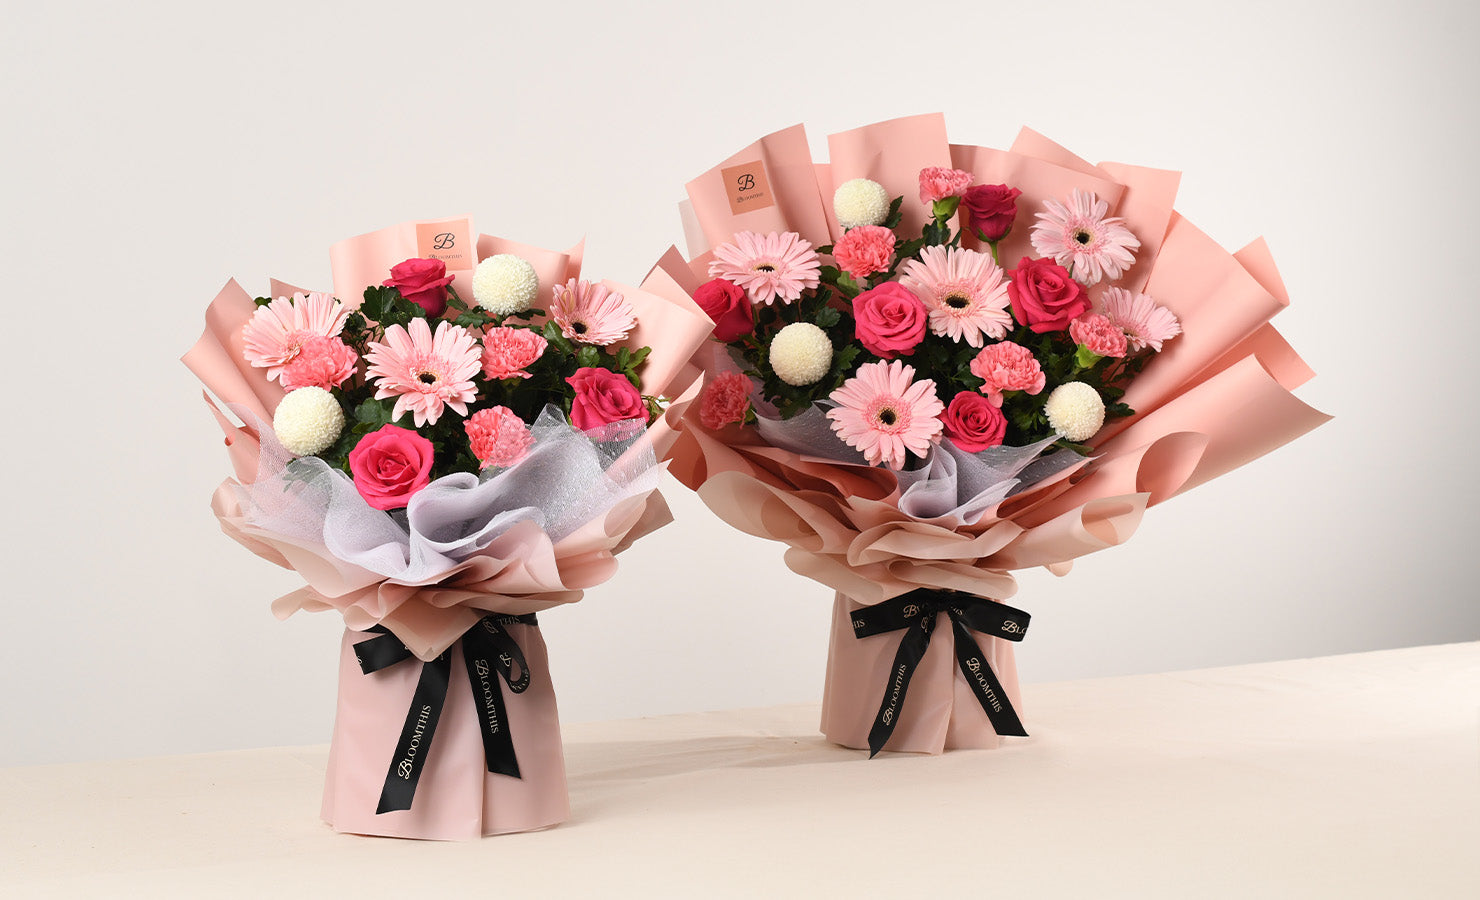 bloomthis-qixi-festival-gift-guide-04-marilyn-pink-carnation-bouquet